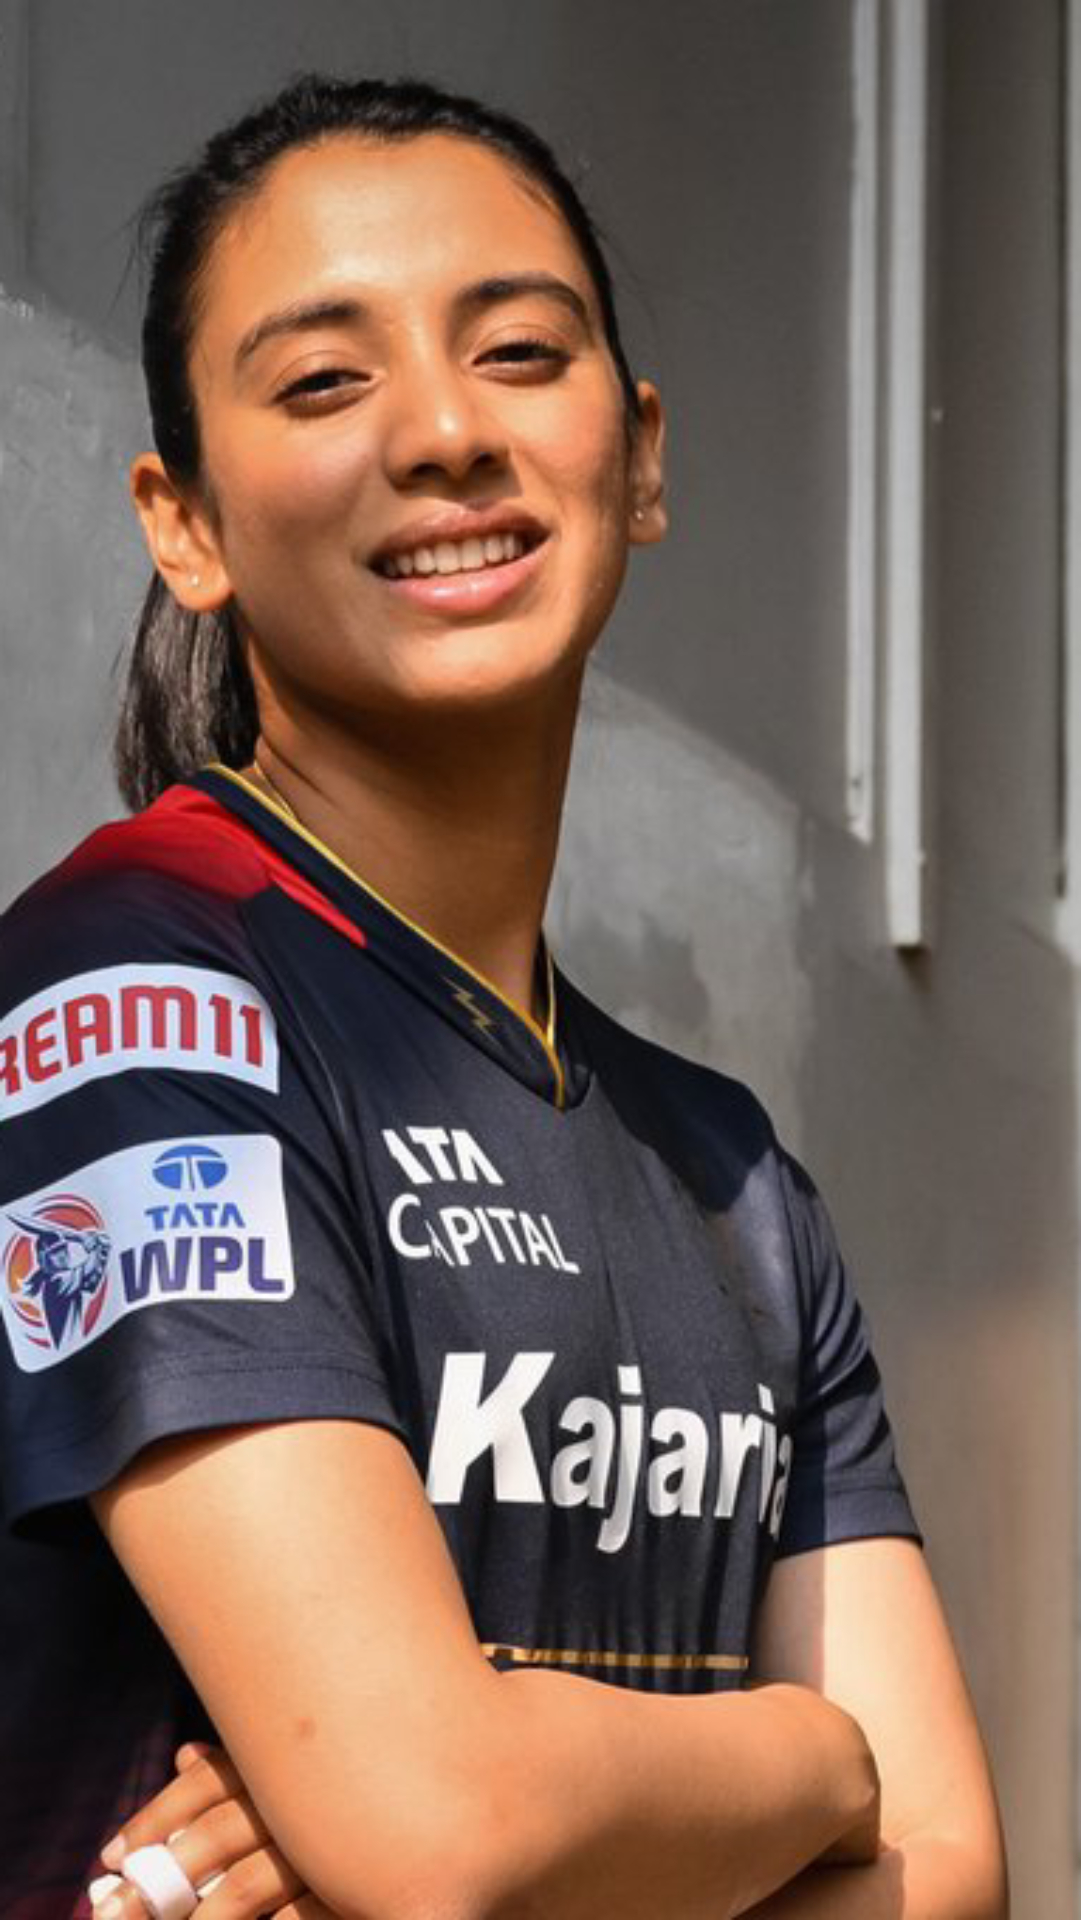 From RCB to MI, here's list of full squads for WPL and their captains